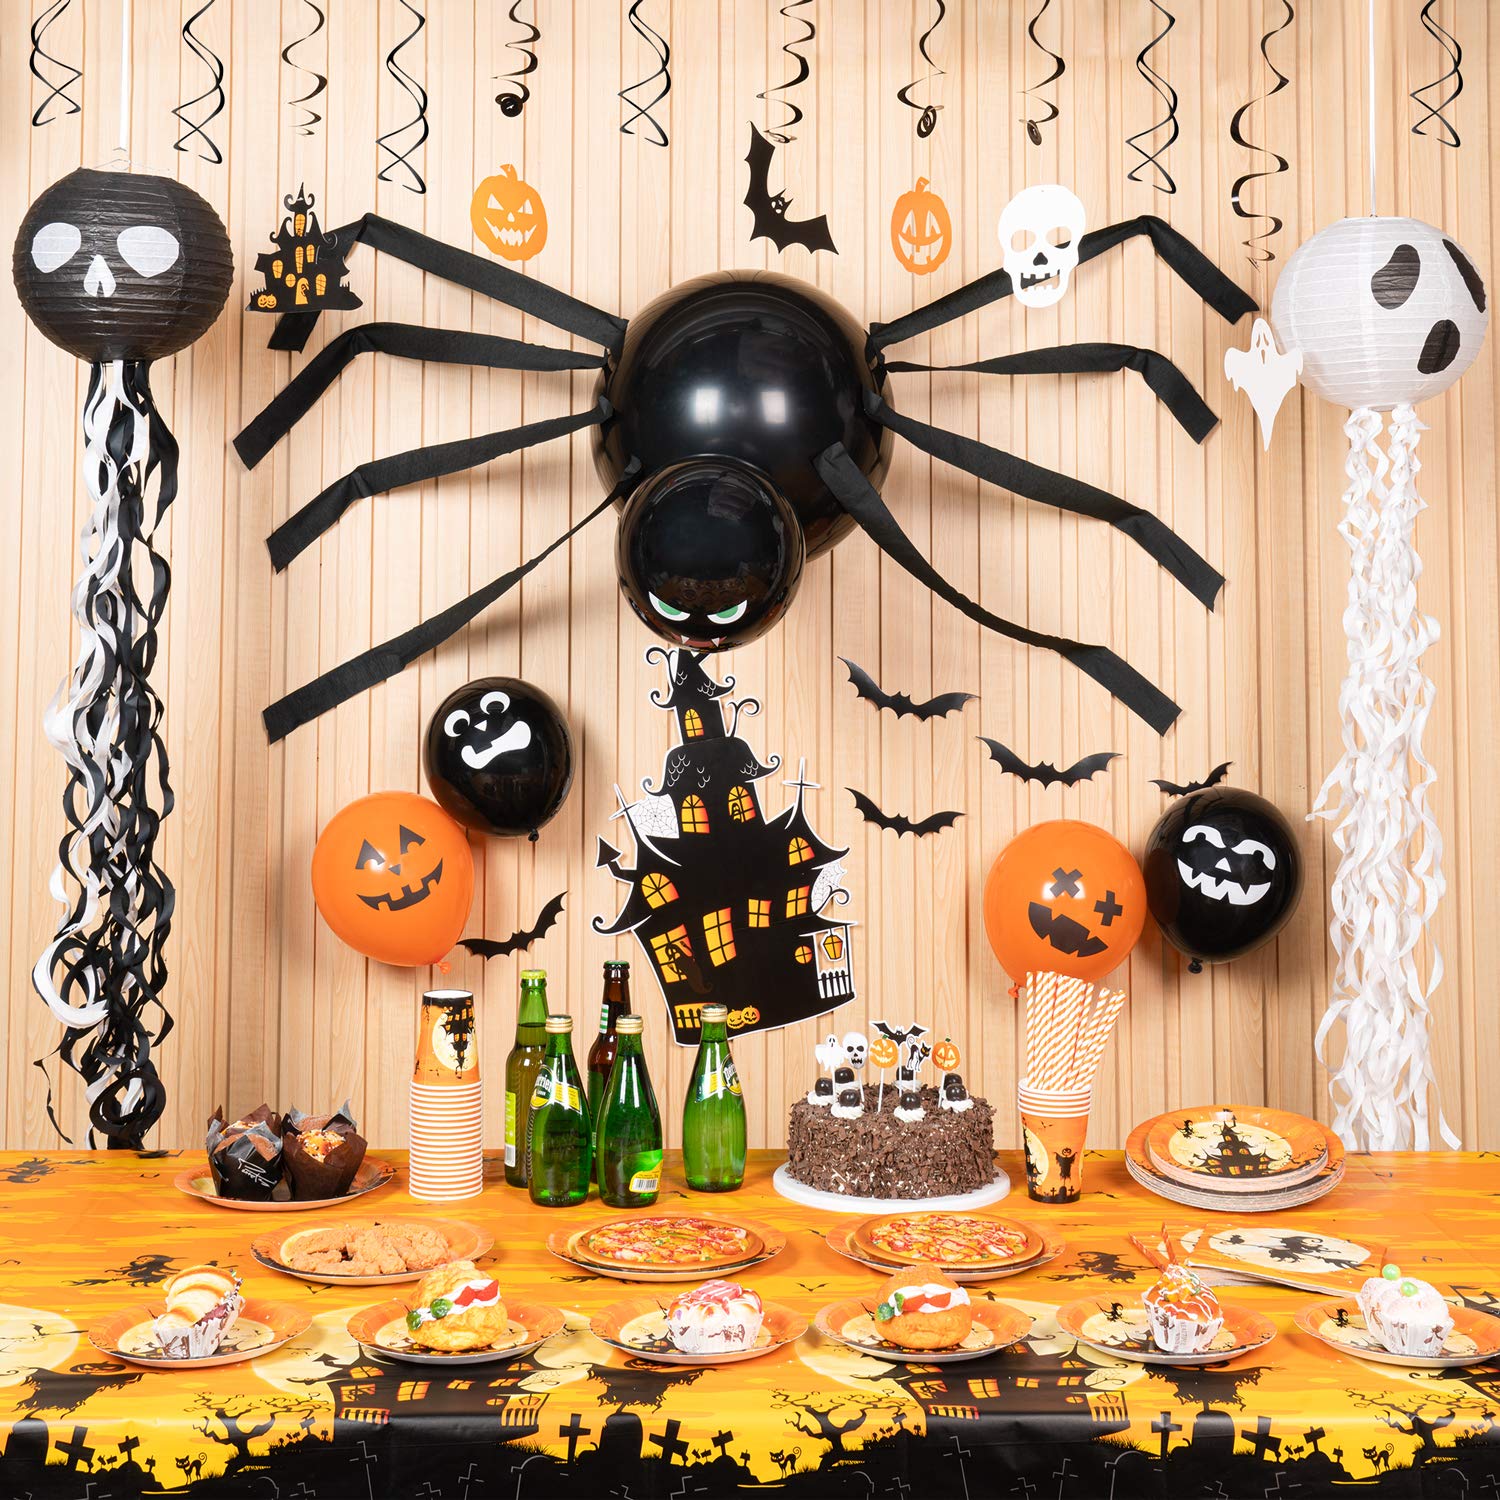 Decorlife Halloween Party Decorations, Halloween Decorations Indoor Including Happy Halloween Banner, Wire Lanterns, Hanging Swirls, Castle and Bats Centerpiece, Spiders and Web, Balloons